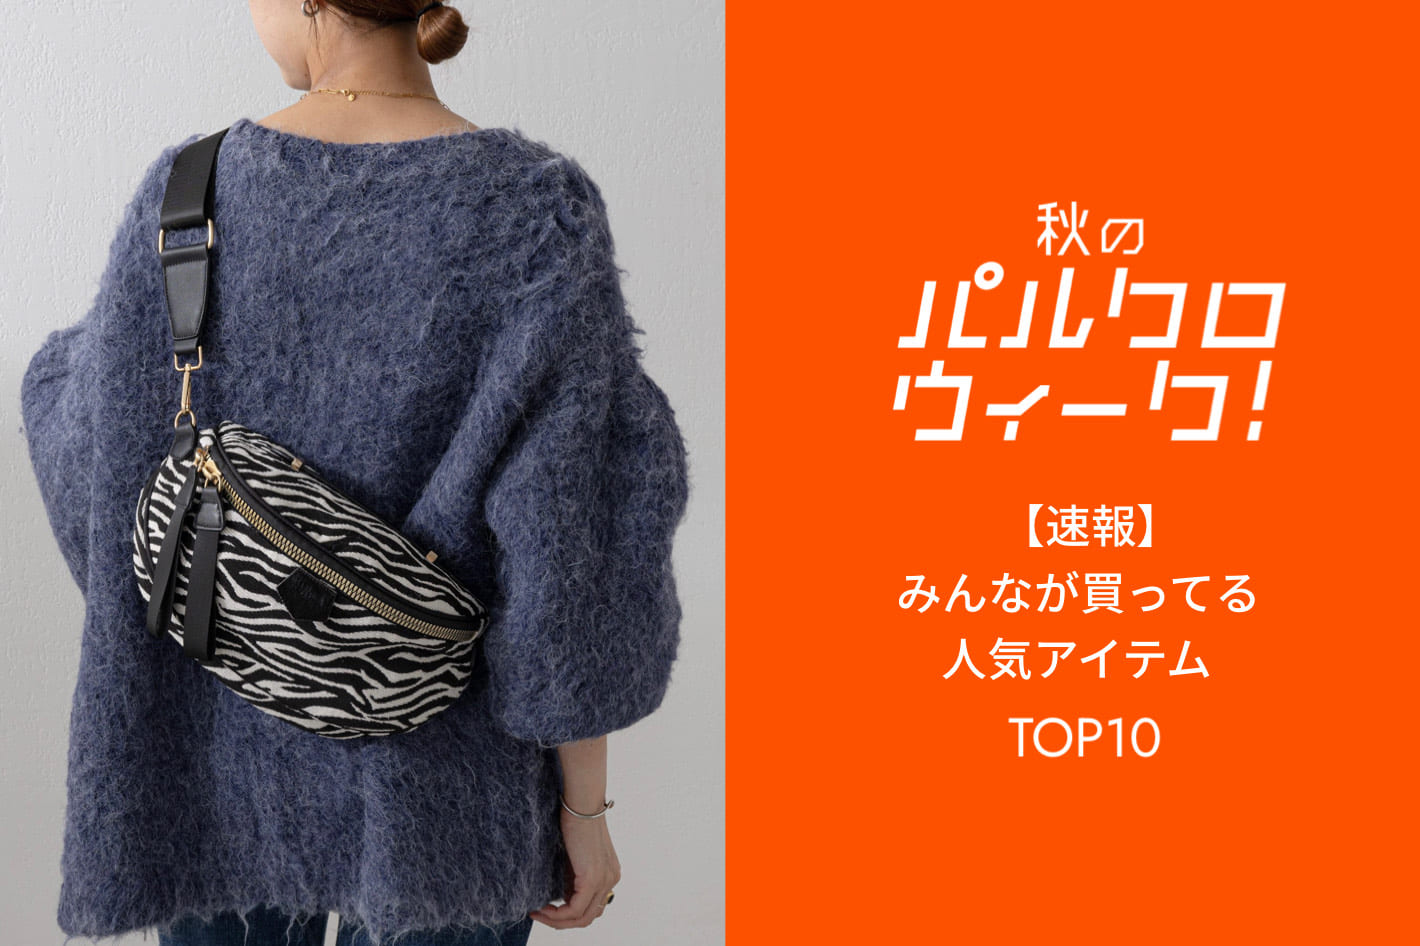 Pal collection 【速報】みんなが買ってる人気アイテムTOP10